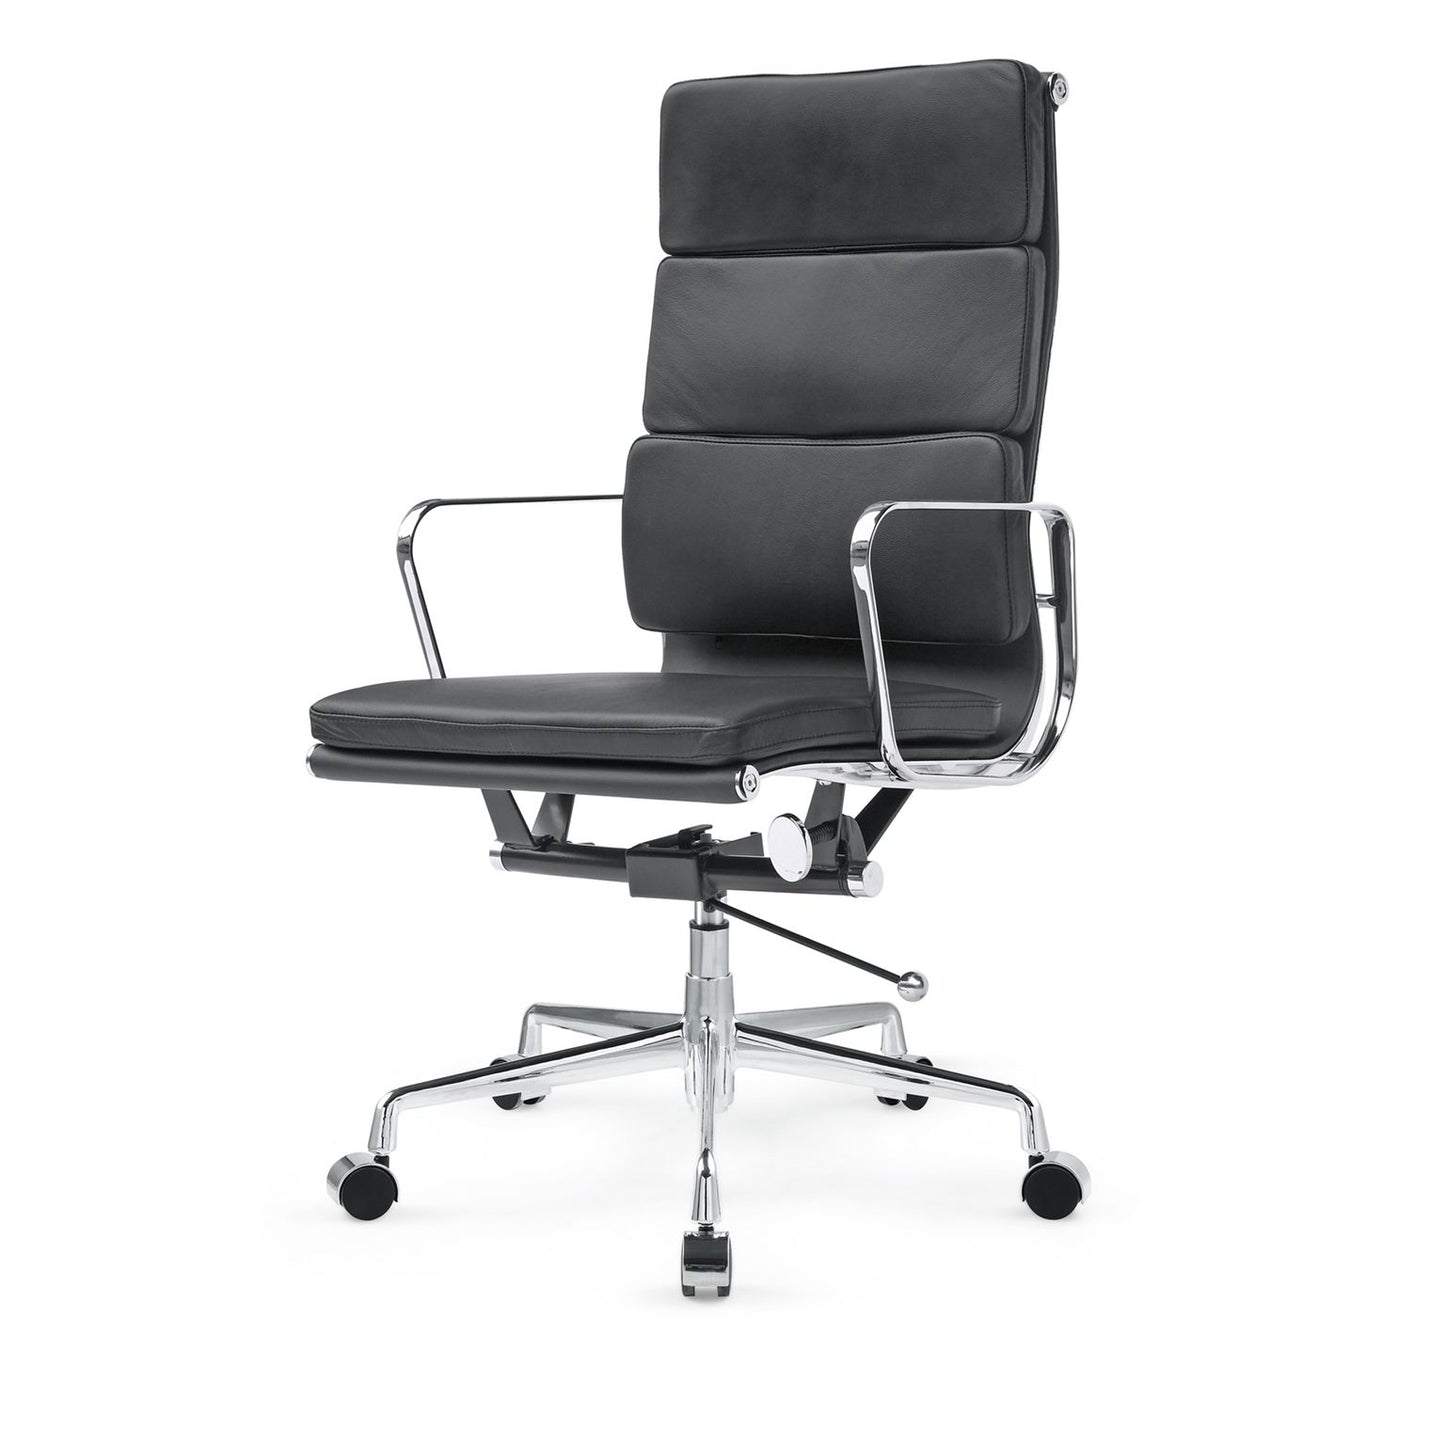 RP Genuine Leather Eames Soft Pad Office Chair, Black color in stock